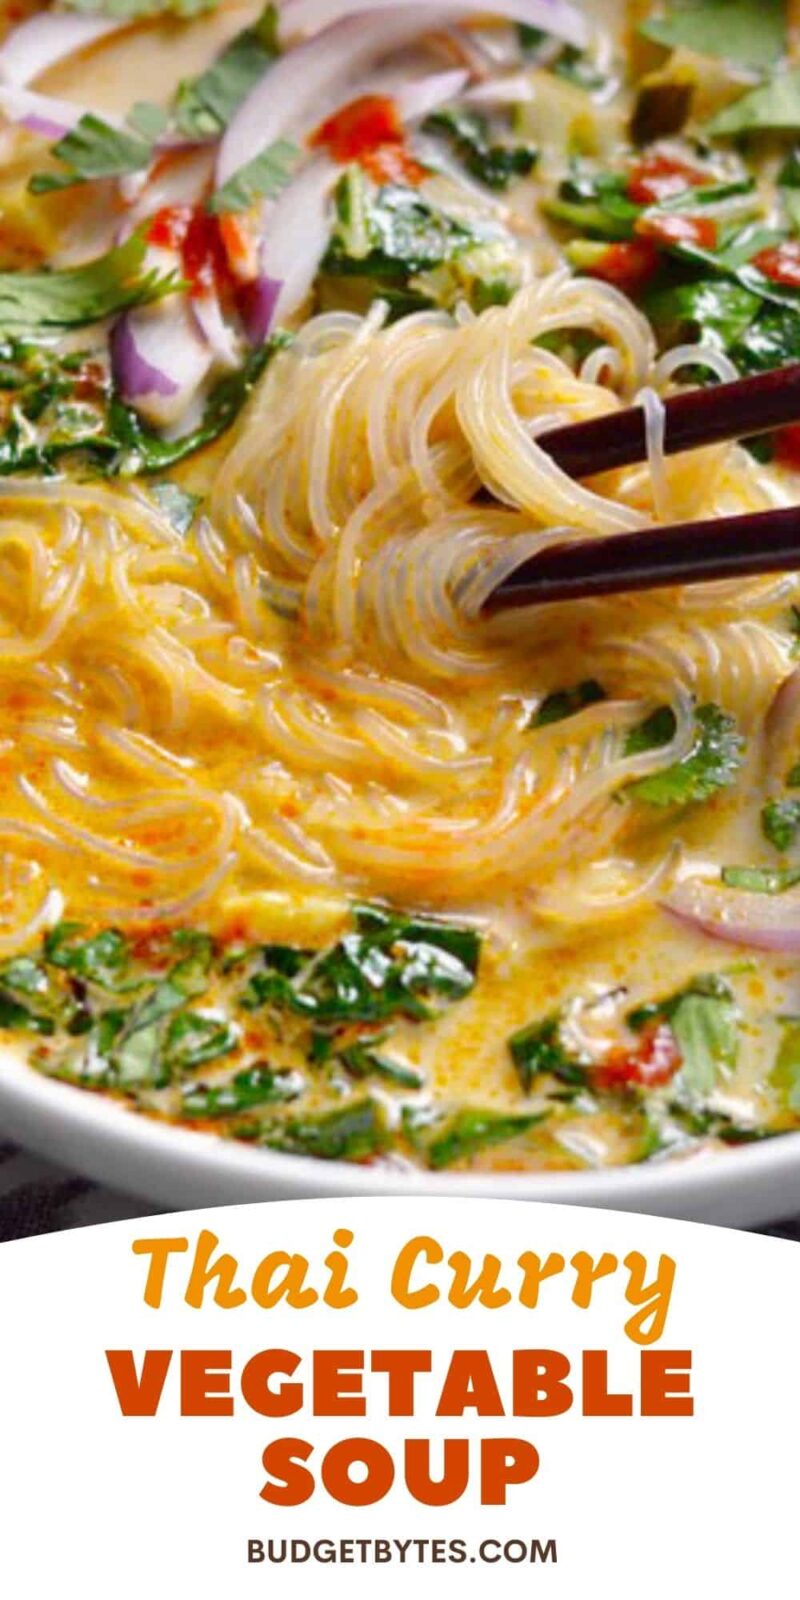 close up of noodles in Thai curry vegetable soup